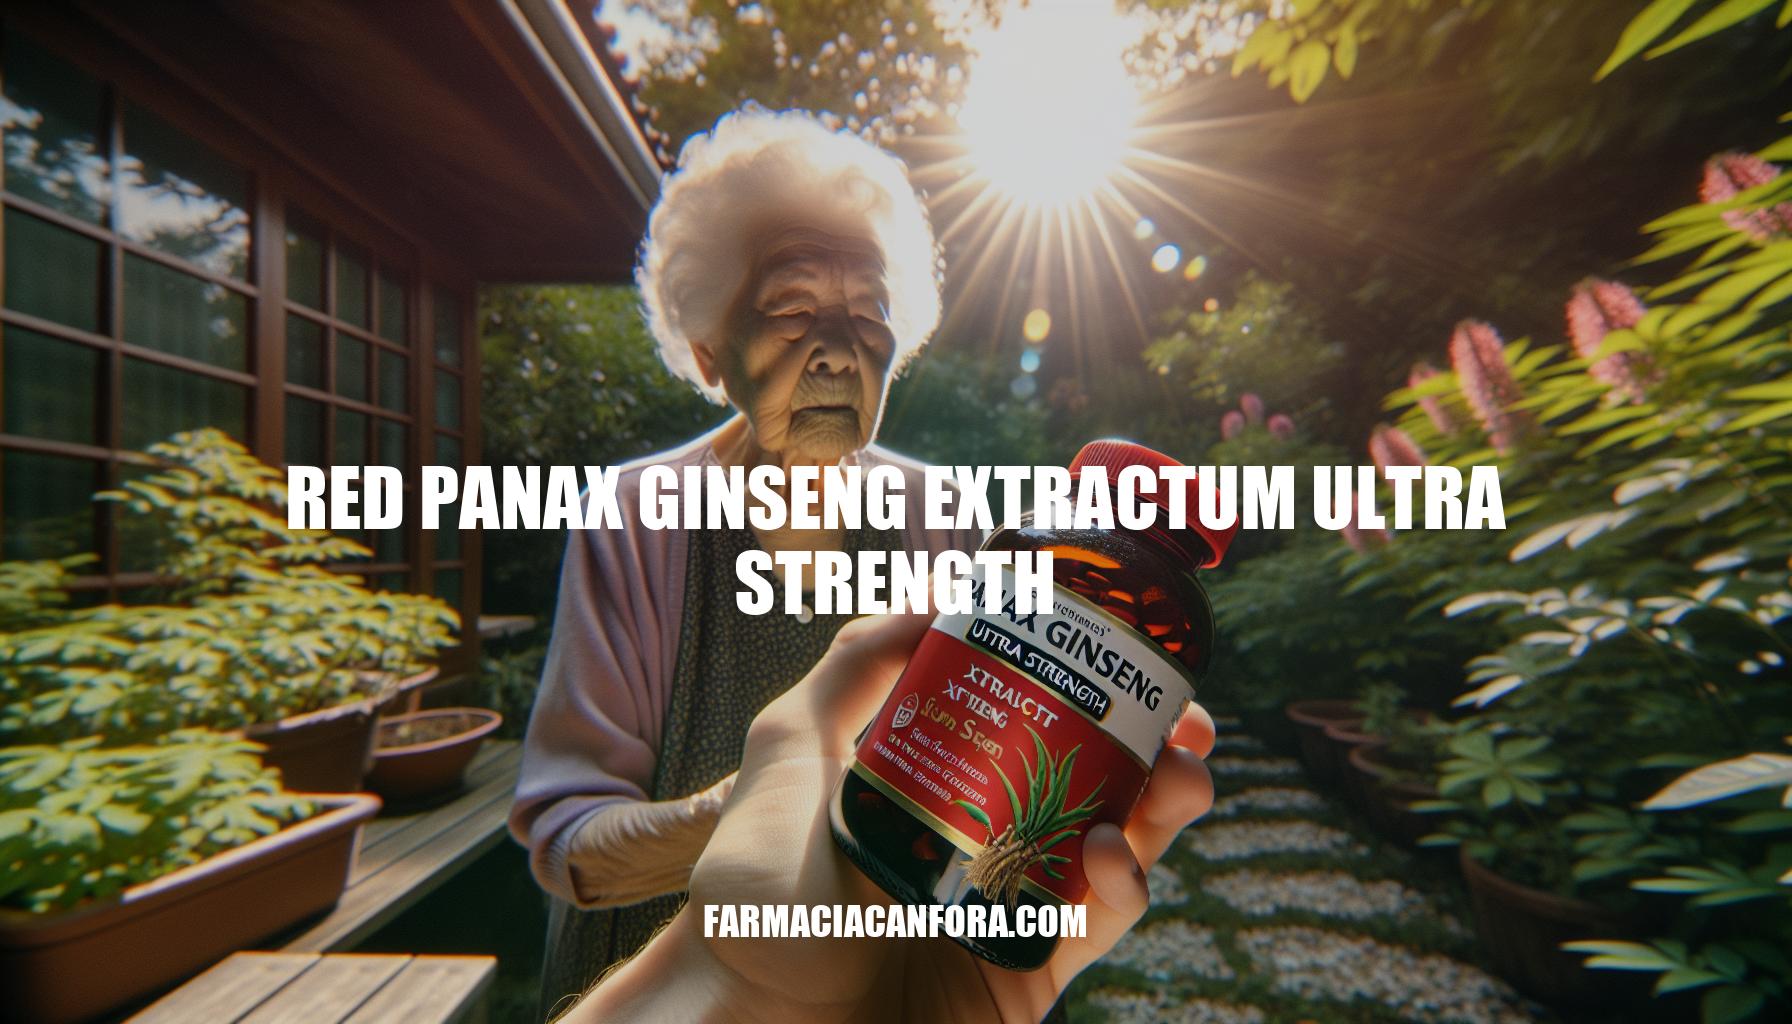 The Benefits of Red Panax Ginseng Extractum Ultra Strength